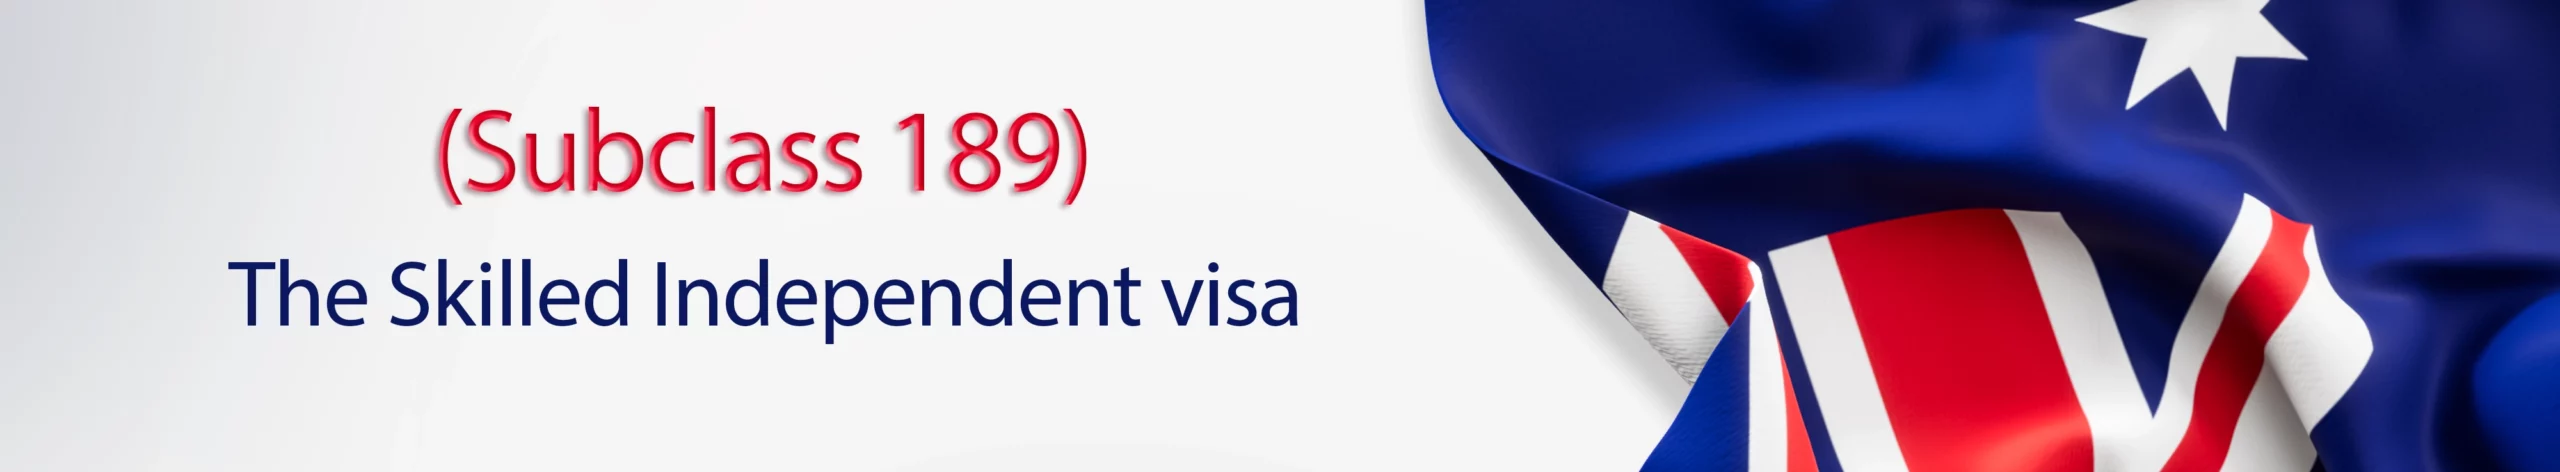 The Skilled Independent visa (subclass 189) banner